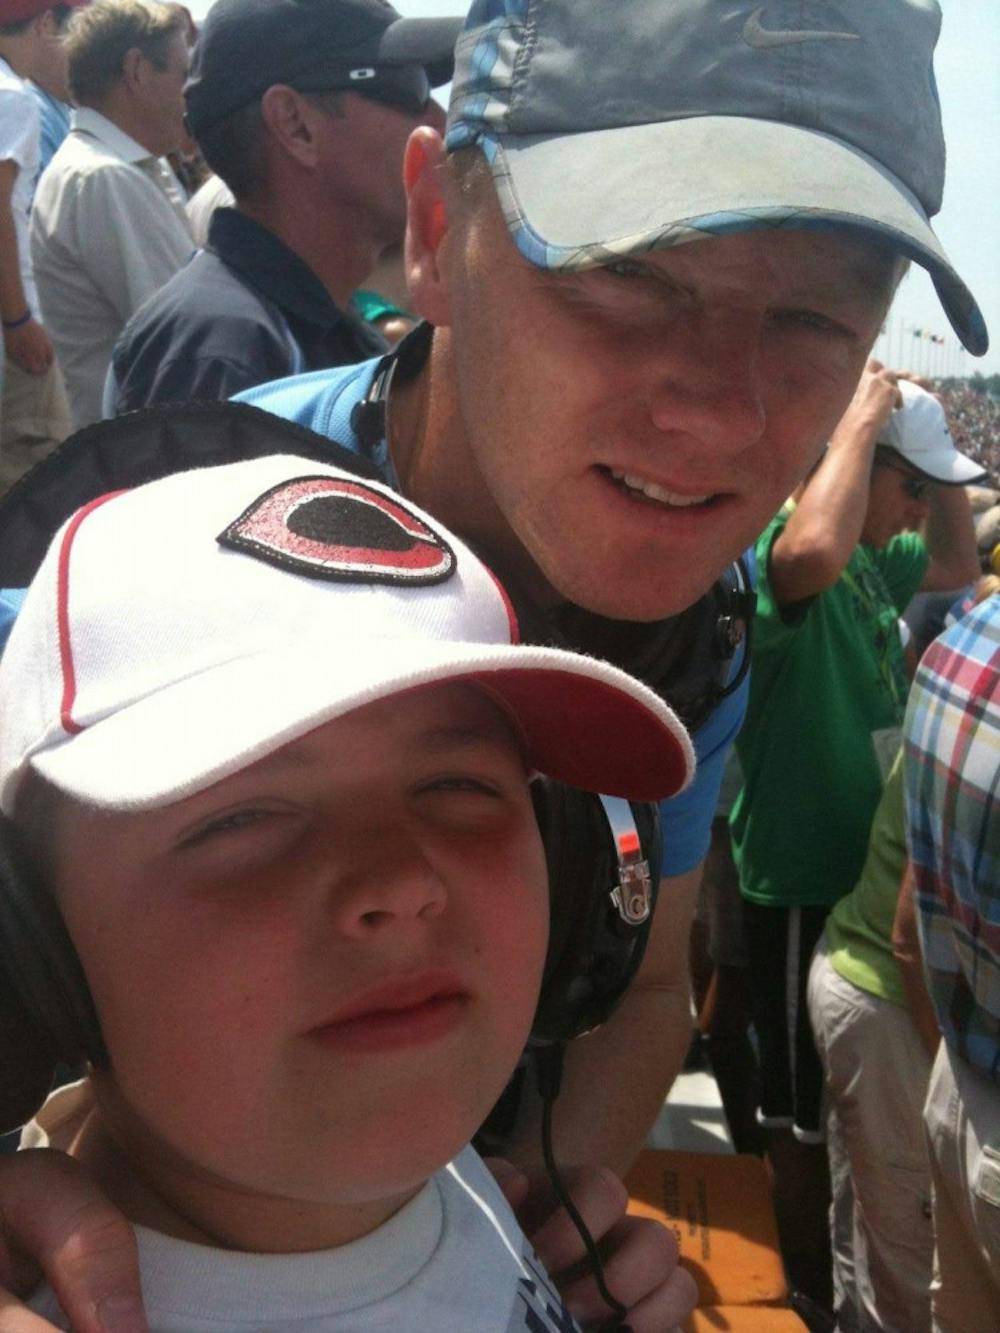 <p>Larry Markle and his son Quentin smile for a picture at the Indianapolis 500 May 29, 2011, at Indianapolis Motor Speedway. It was Quentin's first time at the Indy 500, and he has now been to five. <strong>Larry Markle, Photo Provided</strong></p>